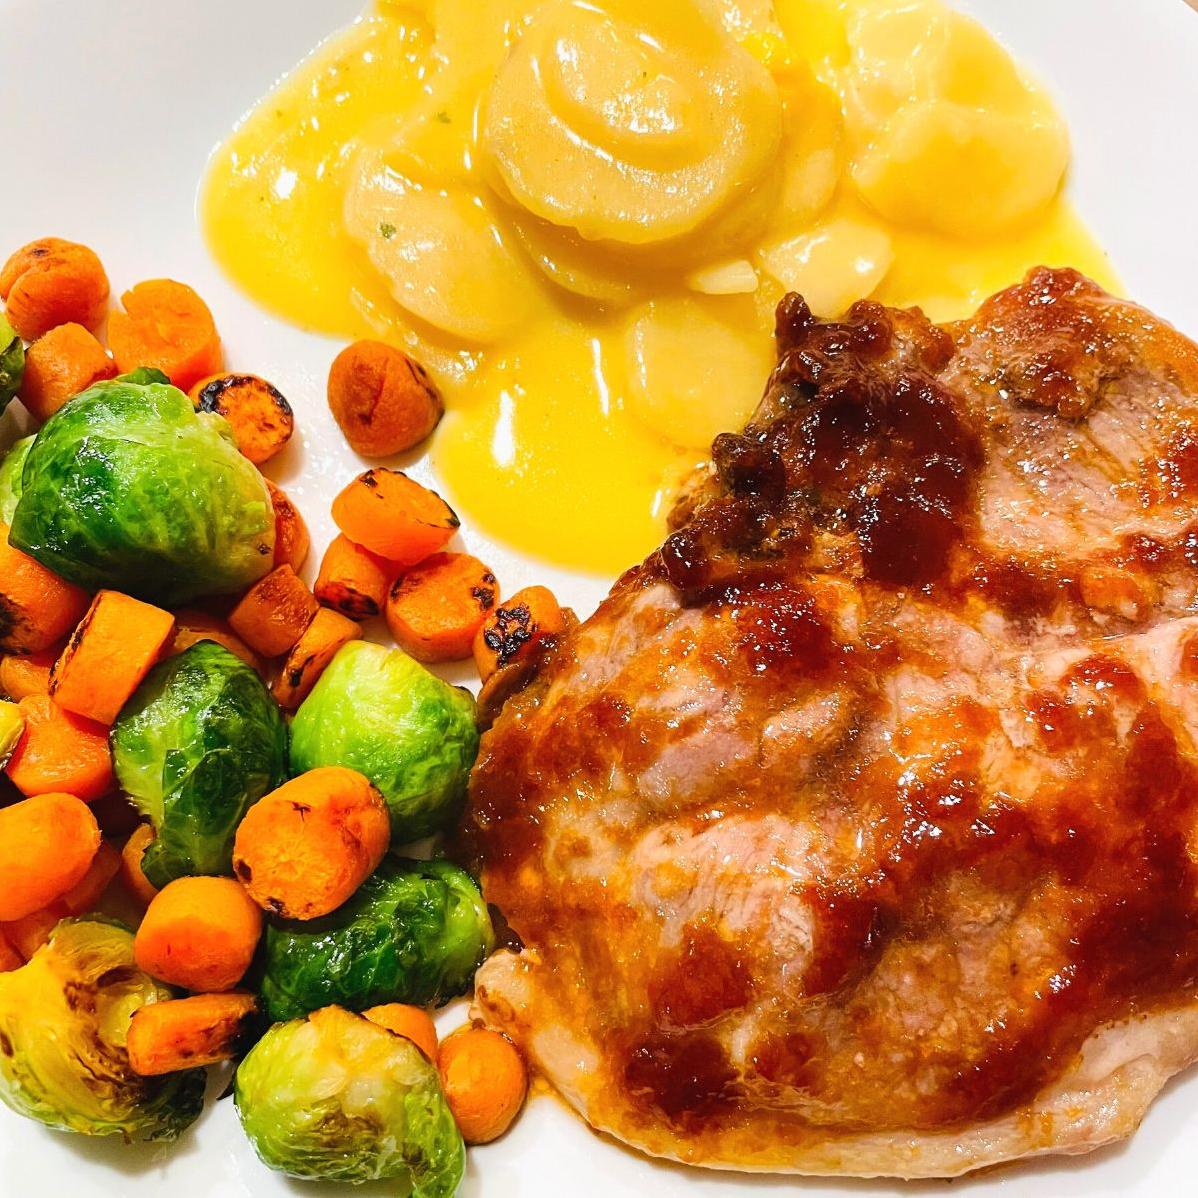  Perfectly roasted pork chops for a satisfying meal.